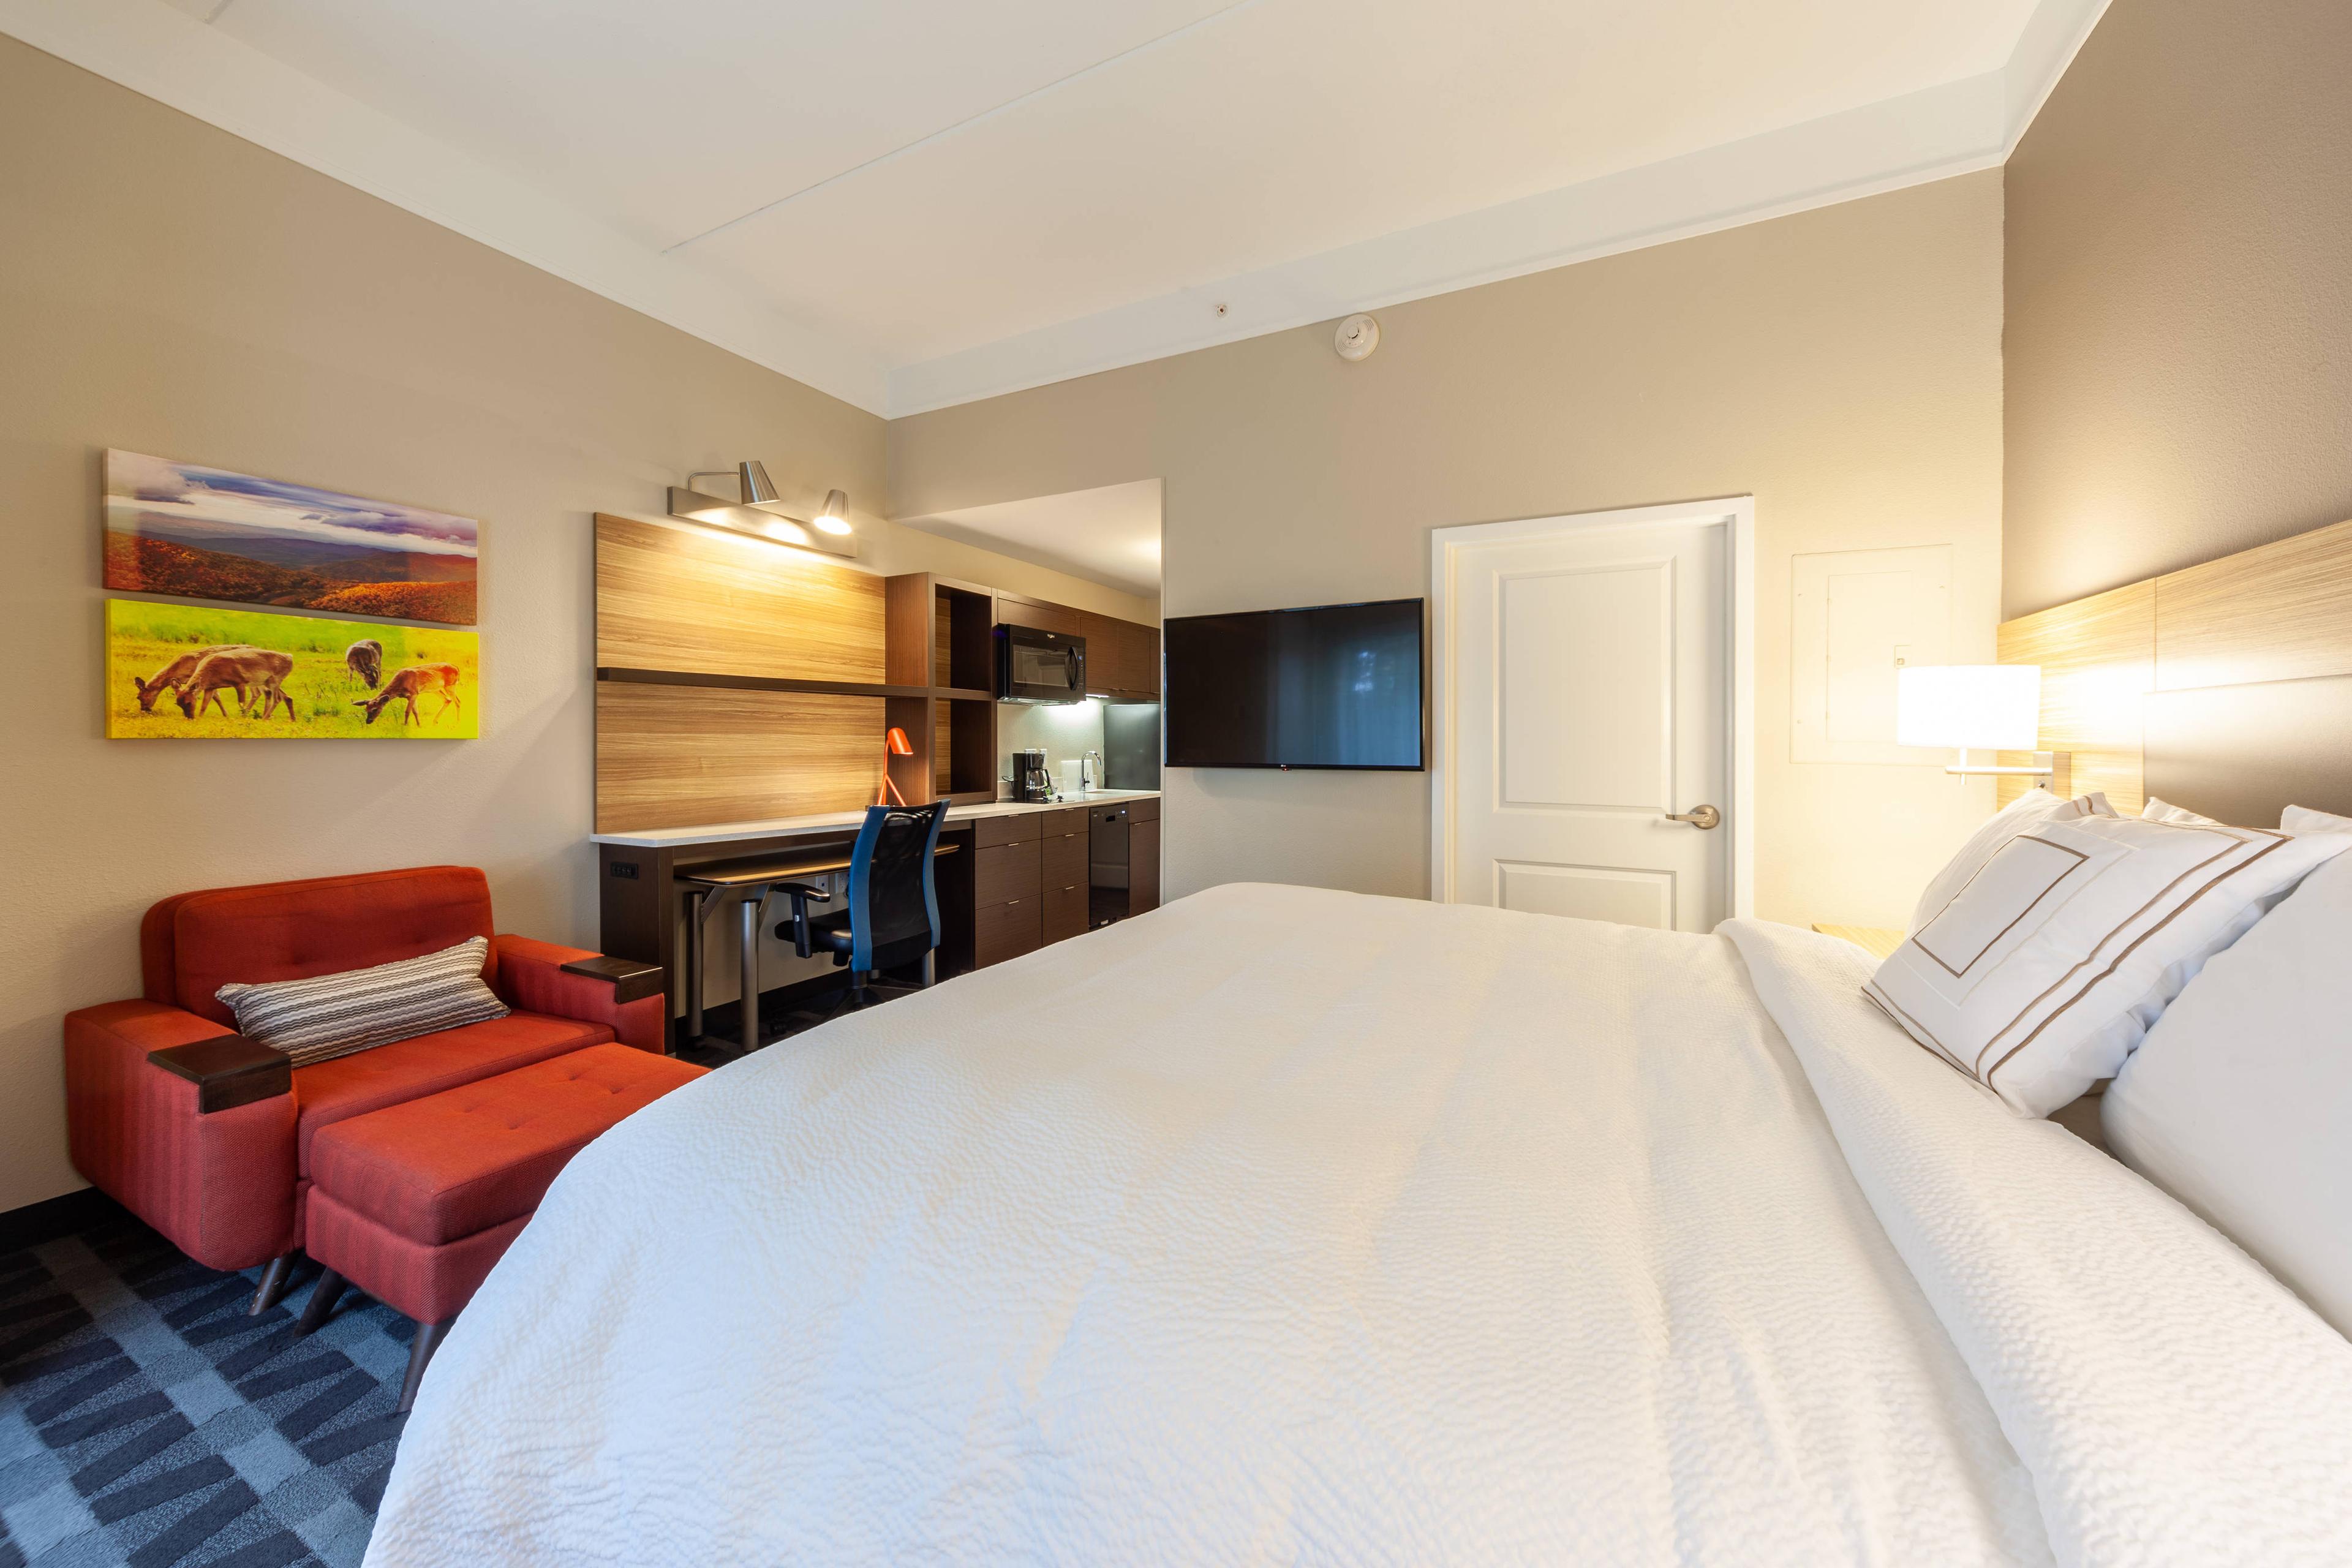 Our king studio offers a large open floor plan and is equipped with a 49-inch flat-screen TV, fully equipped kitchen